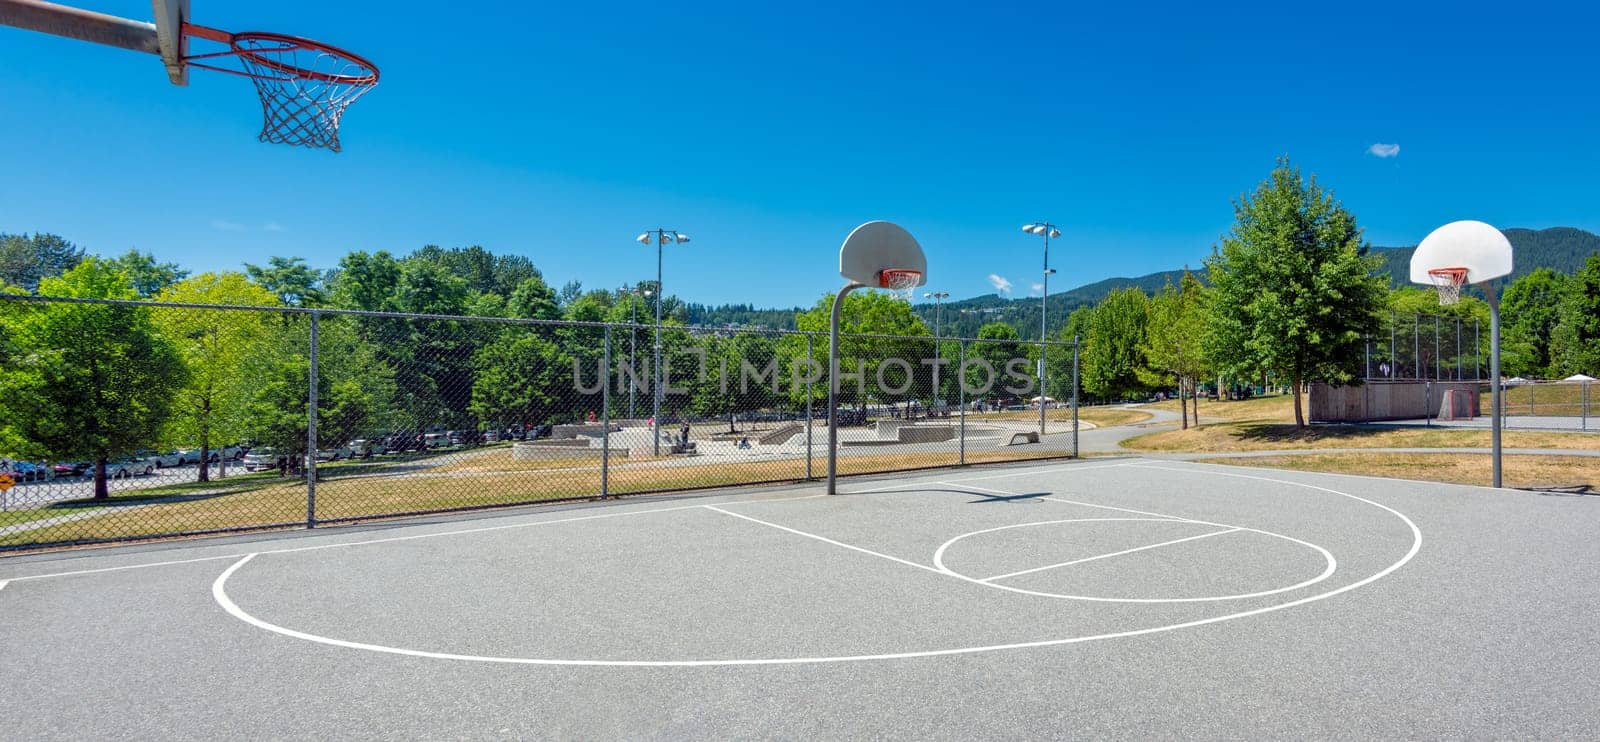 Playground with basketball court in a park on a bright sunny day by Imagenet